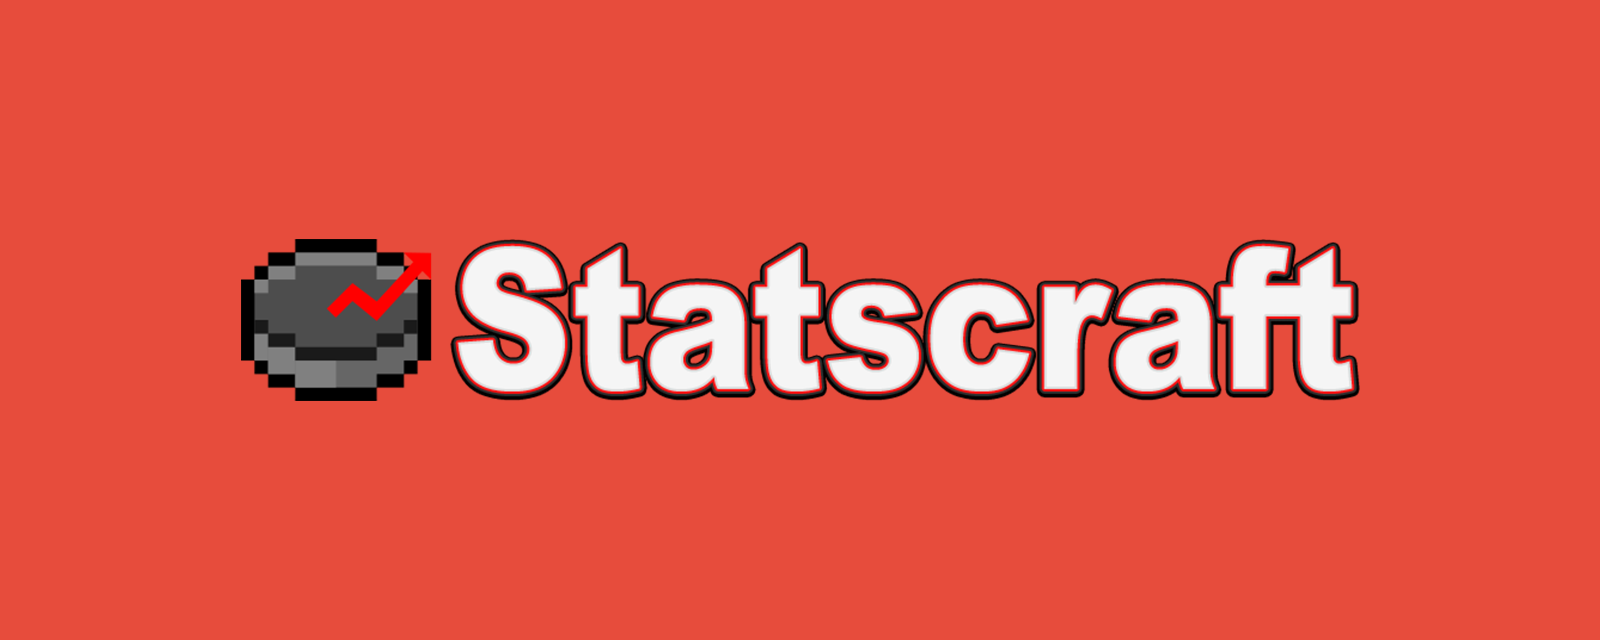 Powerful new grouping for Statscraft and more...